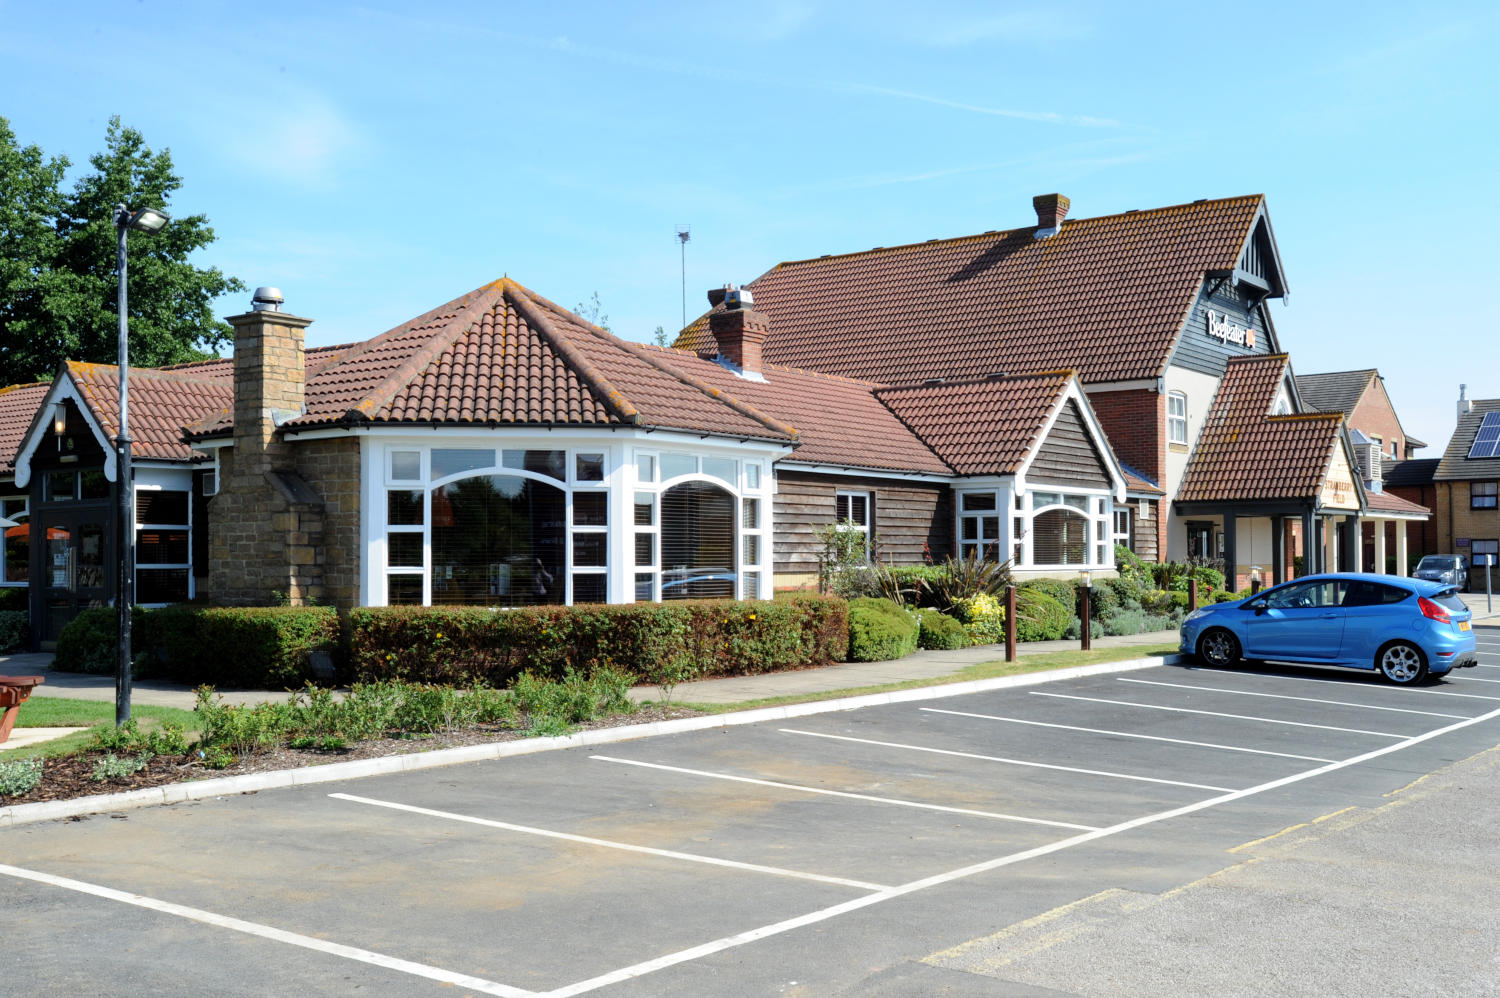 Beefeater restaurant Premier Inn Southend Airport hotel Southend-on-Sea 03333 219014